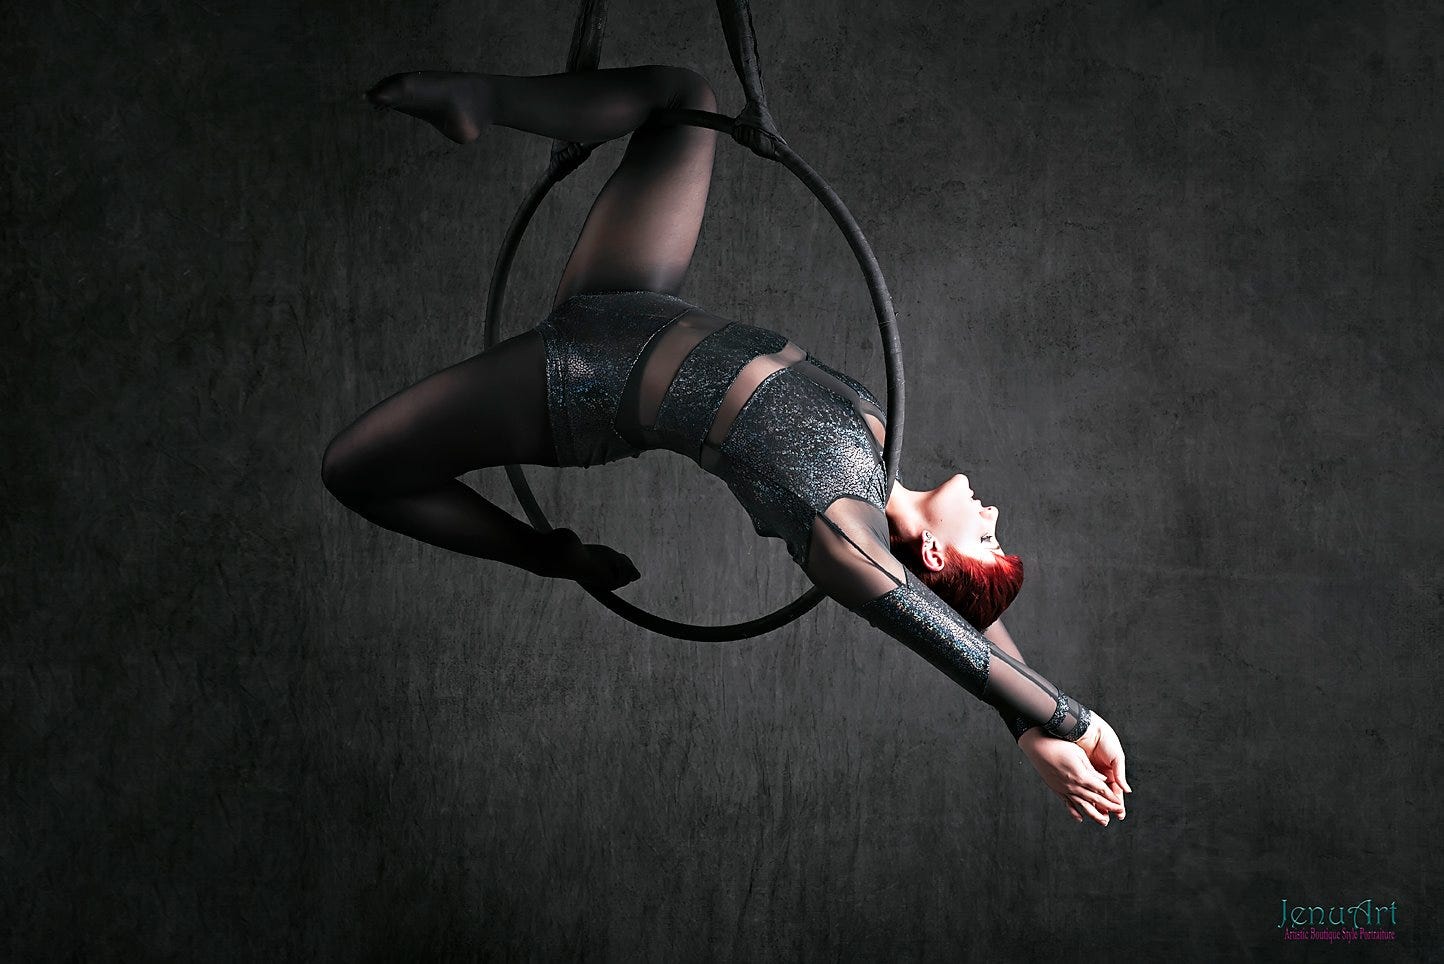 nikkita nouveau, a person wtih white skin and bright red hair, hangs sideways from a lyra hoop. their arms are crossed behind their head below, and their knees are bent to hold themselves on the hood. they wear a black and mesh bodysuit against a black background. the artist attribution in the bottom right corner says "jenu art"